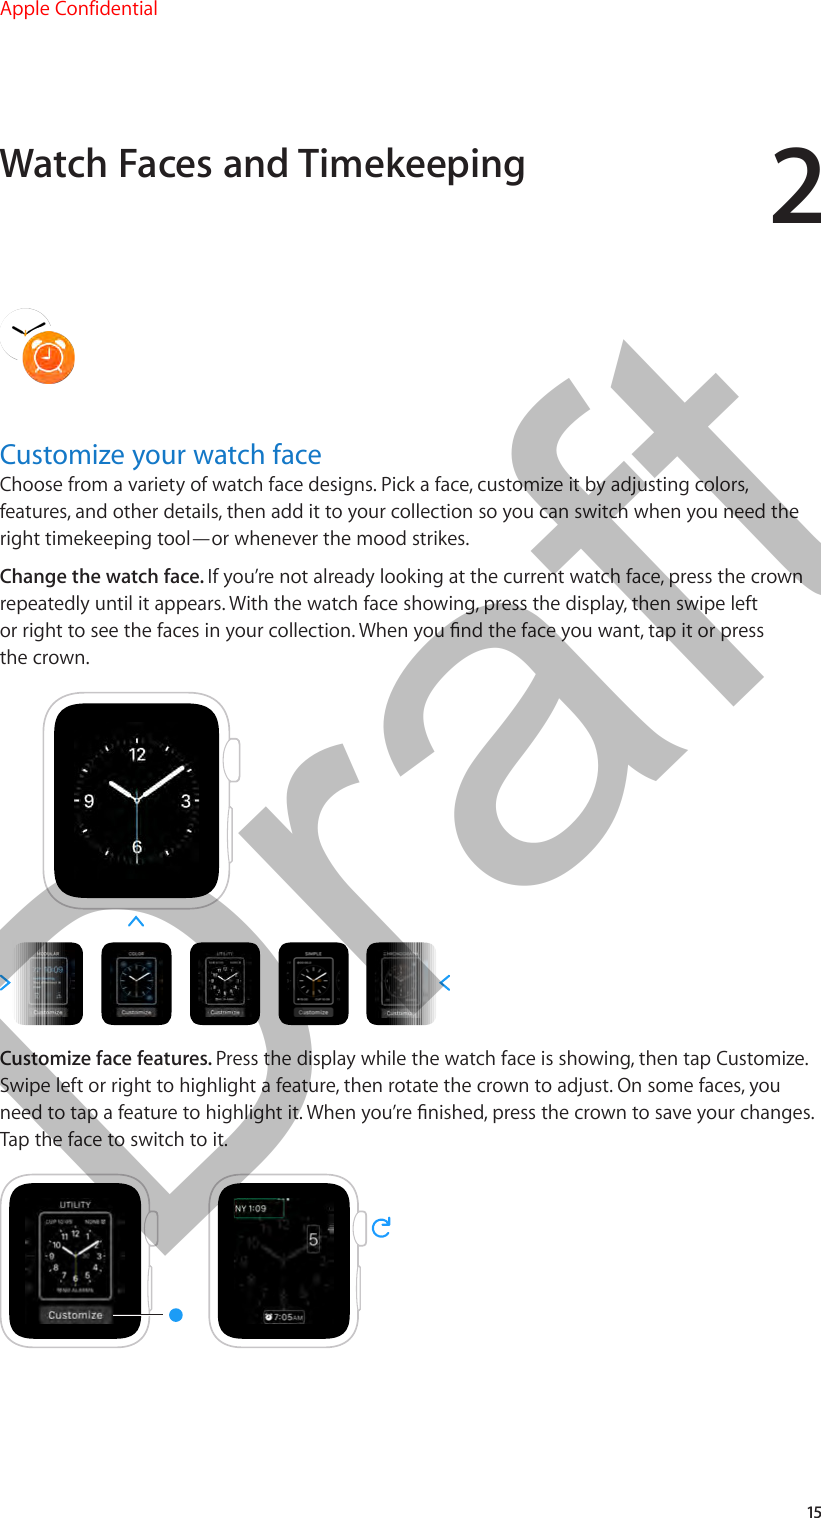 215Customize your watch faceChoose from a variety of watch face designs. Pick a face, customize it by adjusting colors, features, and other details, then add it to your collection so you can switch when you need the right timekeeping tool—or whenever the mood strikes.Change the watch face. If you’re not already looking at the current watch face, press the crown repeatedly until it appears. With the watch face showing, press the display, then swipe left or right to see the faces in your collection. When you nd the face you want, tap it or press the crown.Customize face features. Press the display while the watch face is showing, then tap Customize. Swipe left or right to highlight a feature, then rotate the crown to adjust. On some faces, you need to tap a feature to highlight it. When you’re nished, press the crown to save your changes. Tap the face to switch to it.Watch Faces and TimekeepingApple Confidential  100% resize factorDraft